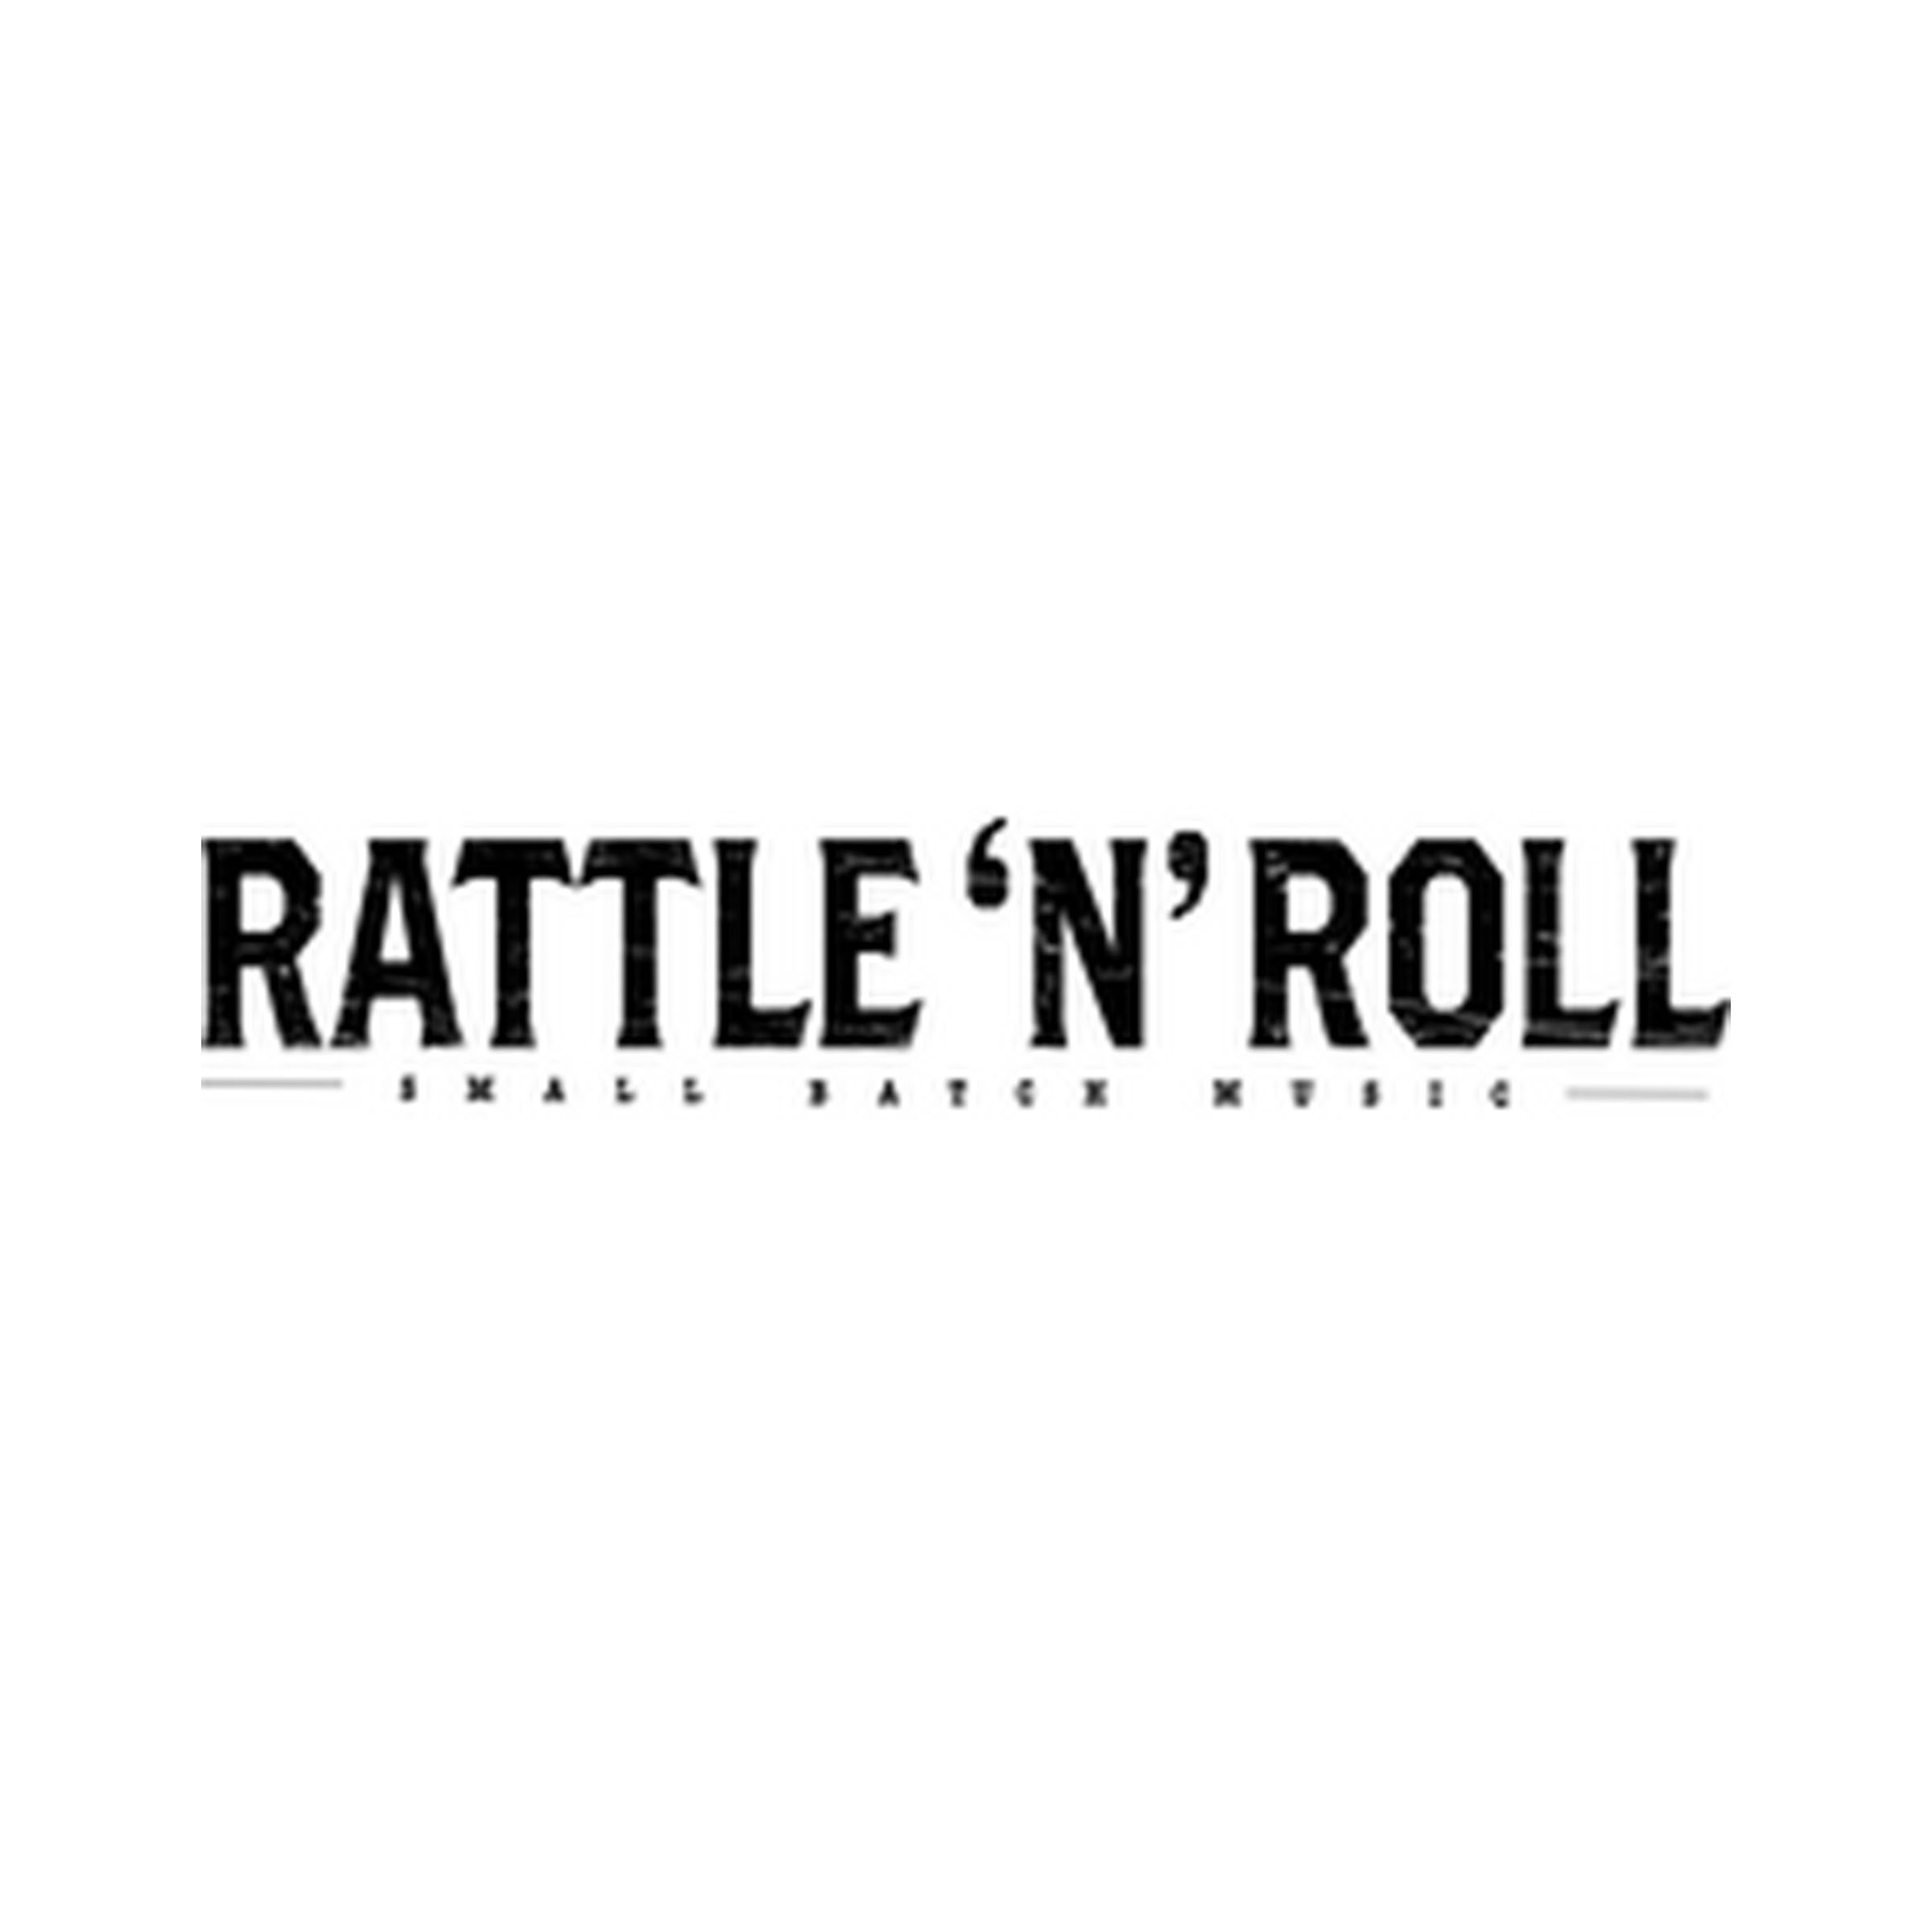 Rattle and Roll